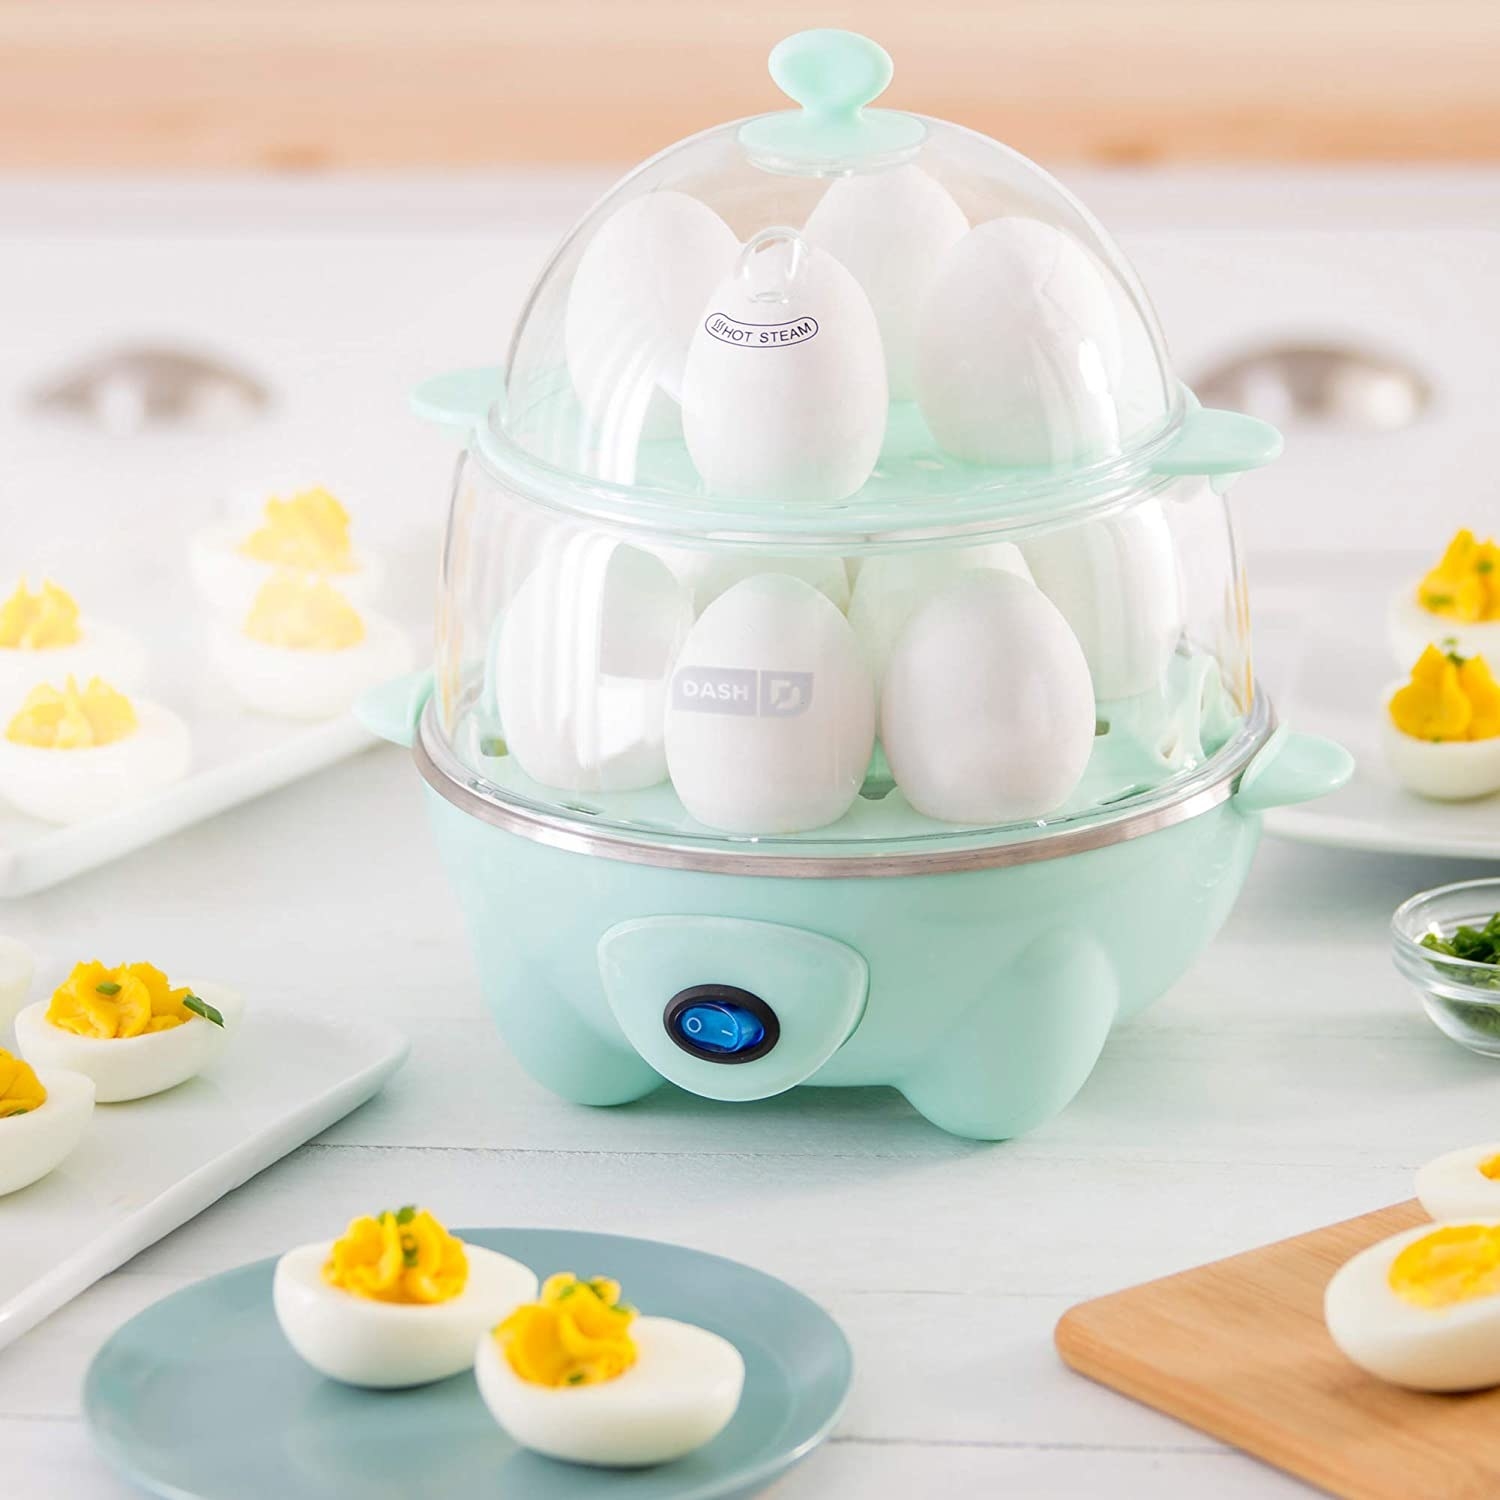 The egg cooker, which has two tiers and can hold12 hard-boiled eggs at one time